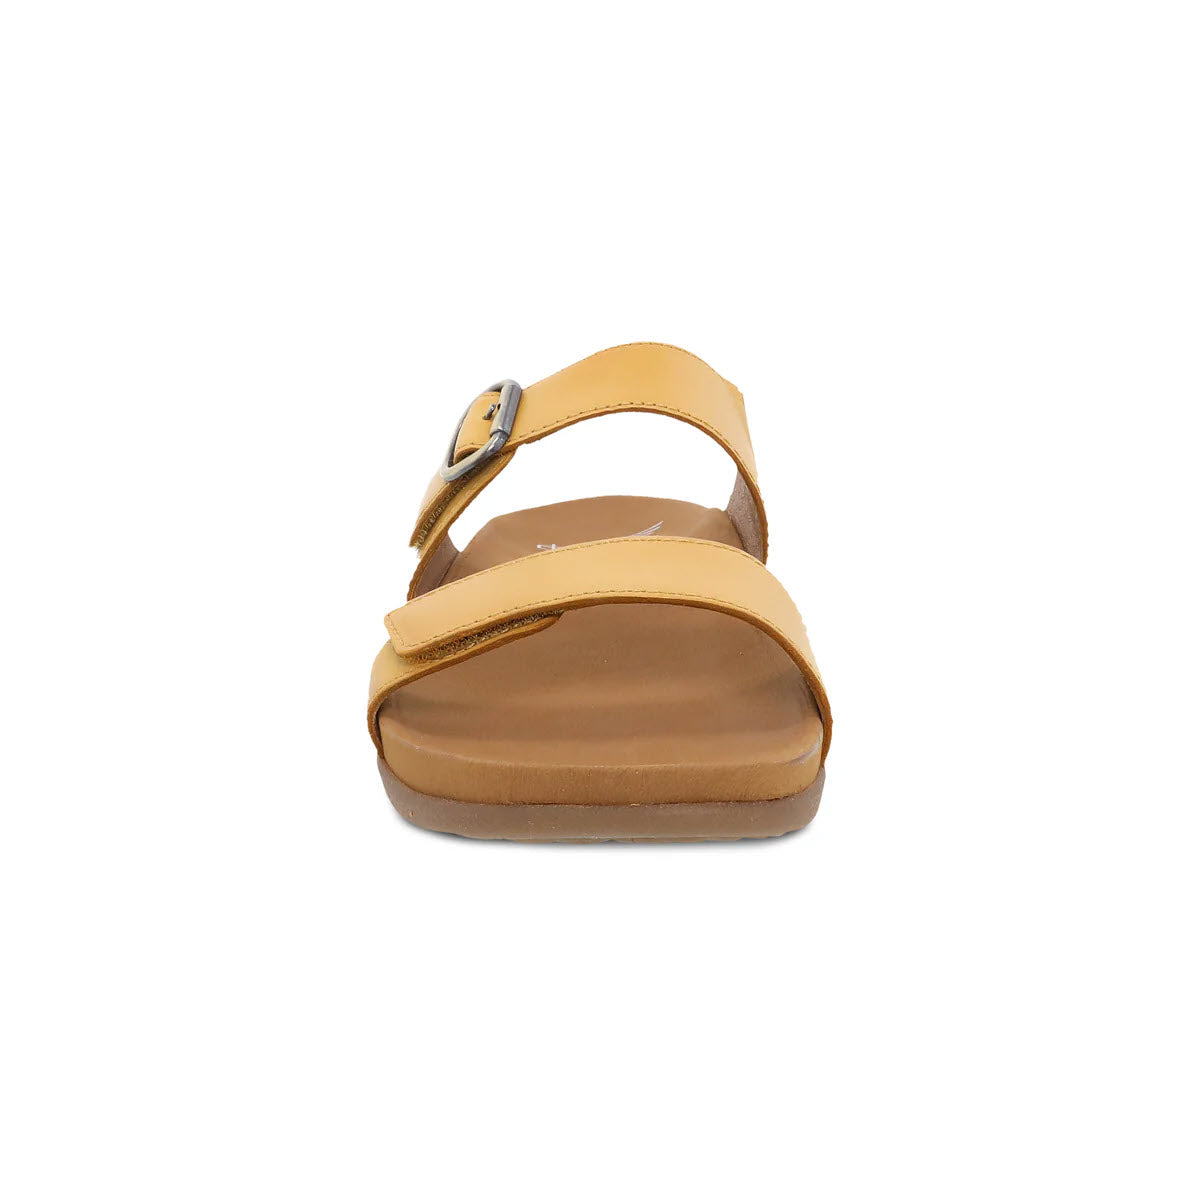 A single Dansko tan slide sandal with a thick strap over the toes and a thinner ankle strap, displayed against a white background.